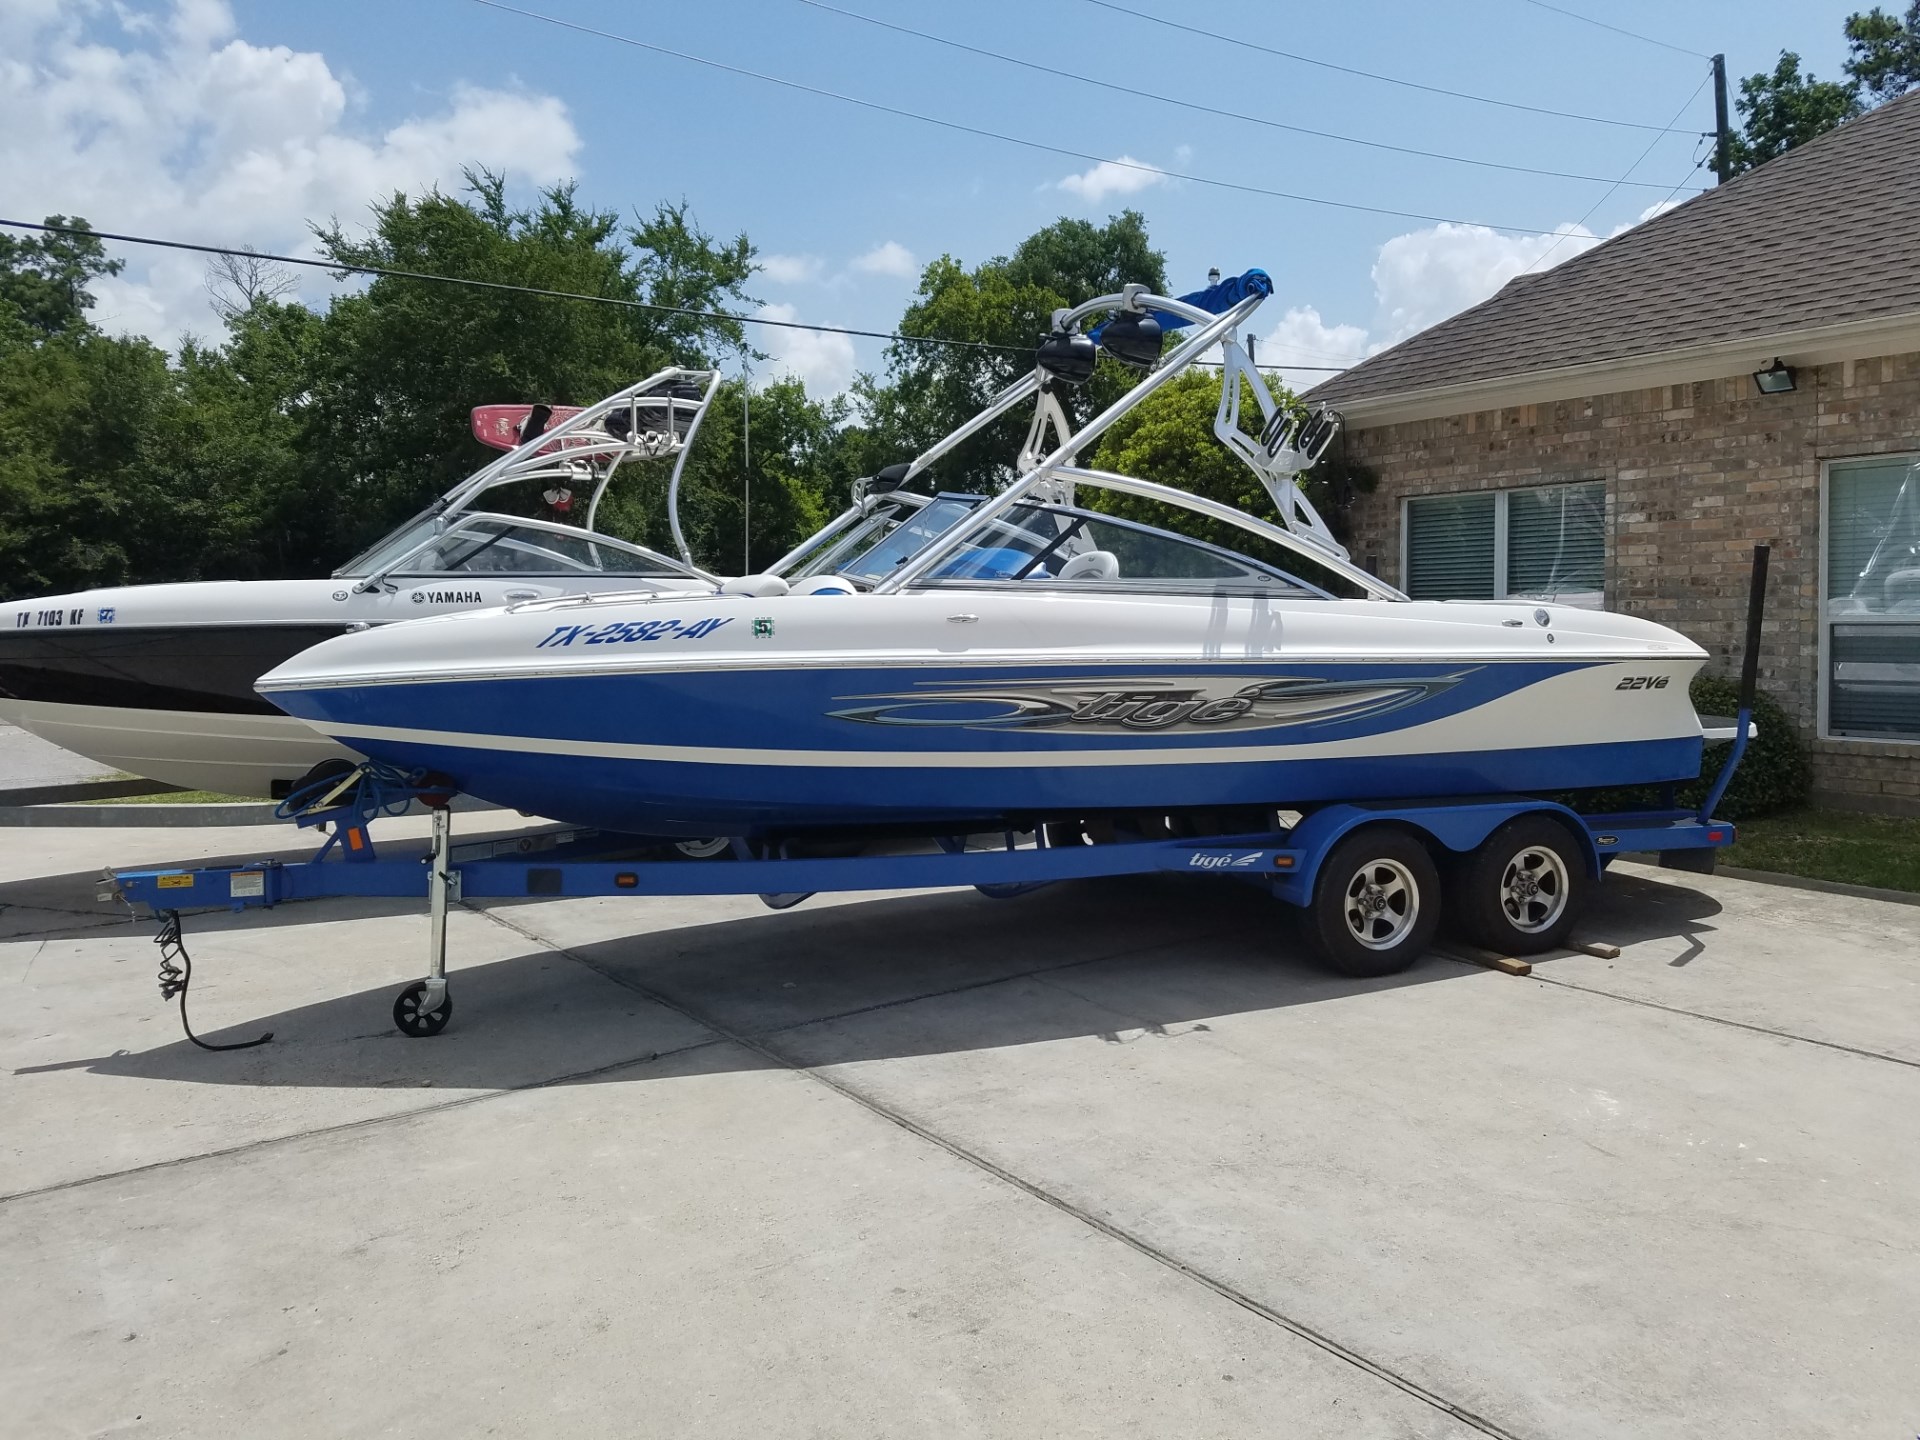 Tige boats for sale - 7 - boats.com